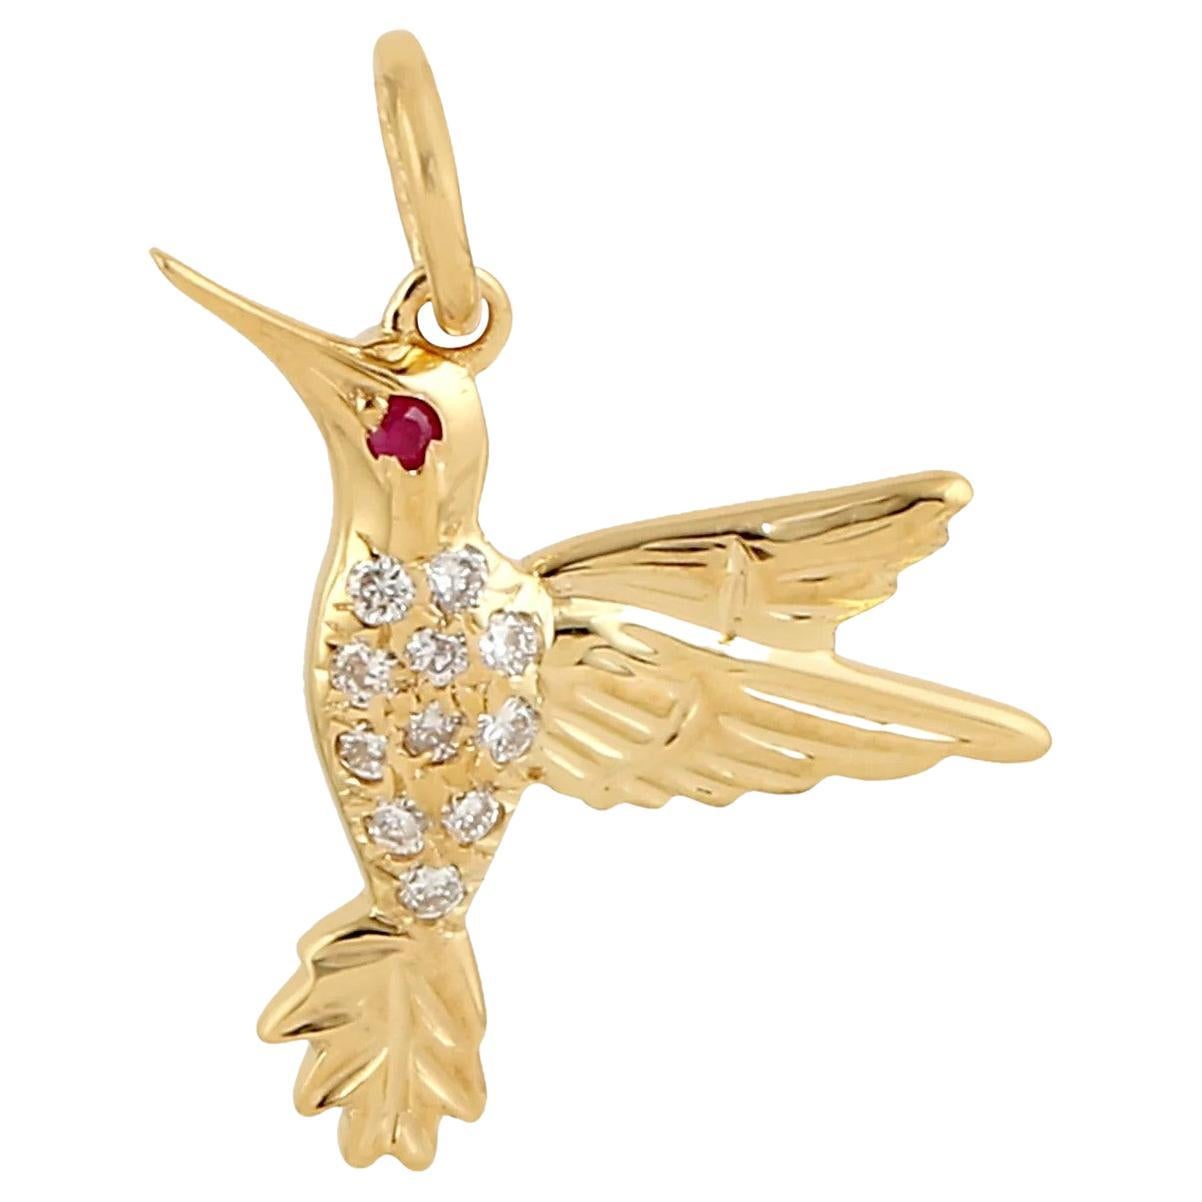 Meghna Jewels Hand Carved Bird Ruby Diamond 18 Karat Gold Charm Pendant Necklace For Sale